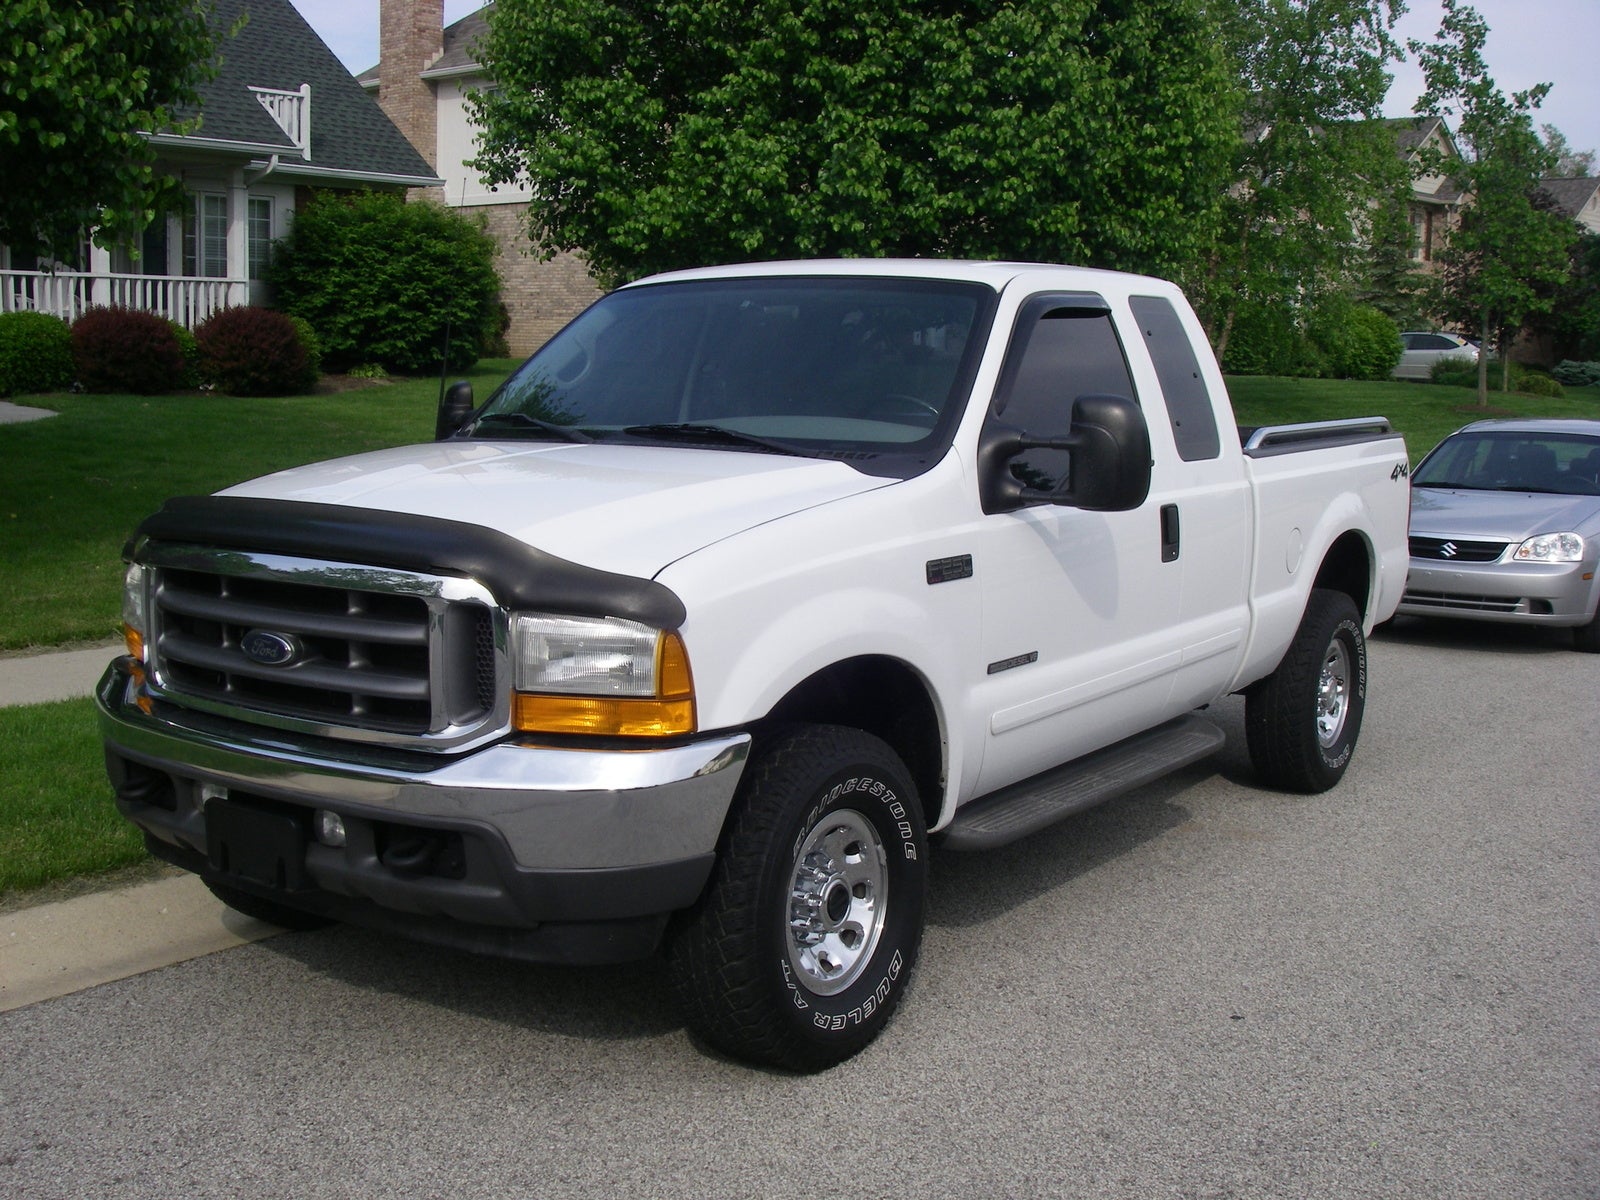 2001 Ford F-250 Super Duty - Pictures - CarGurus